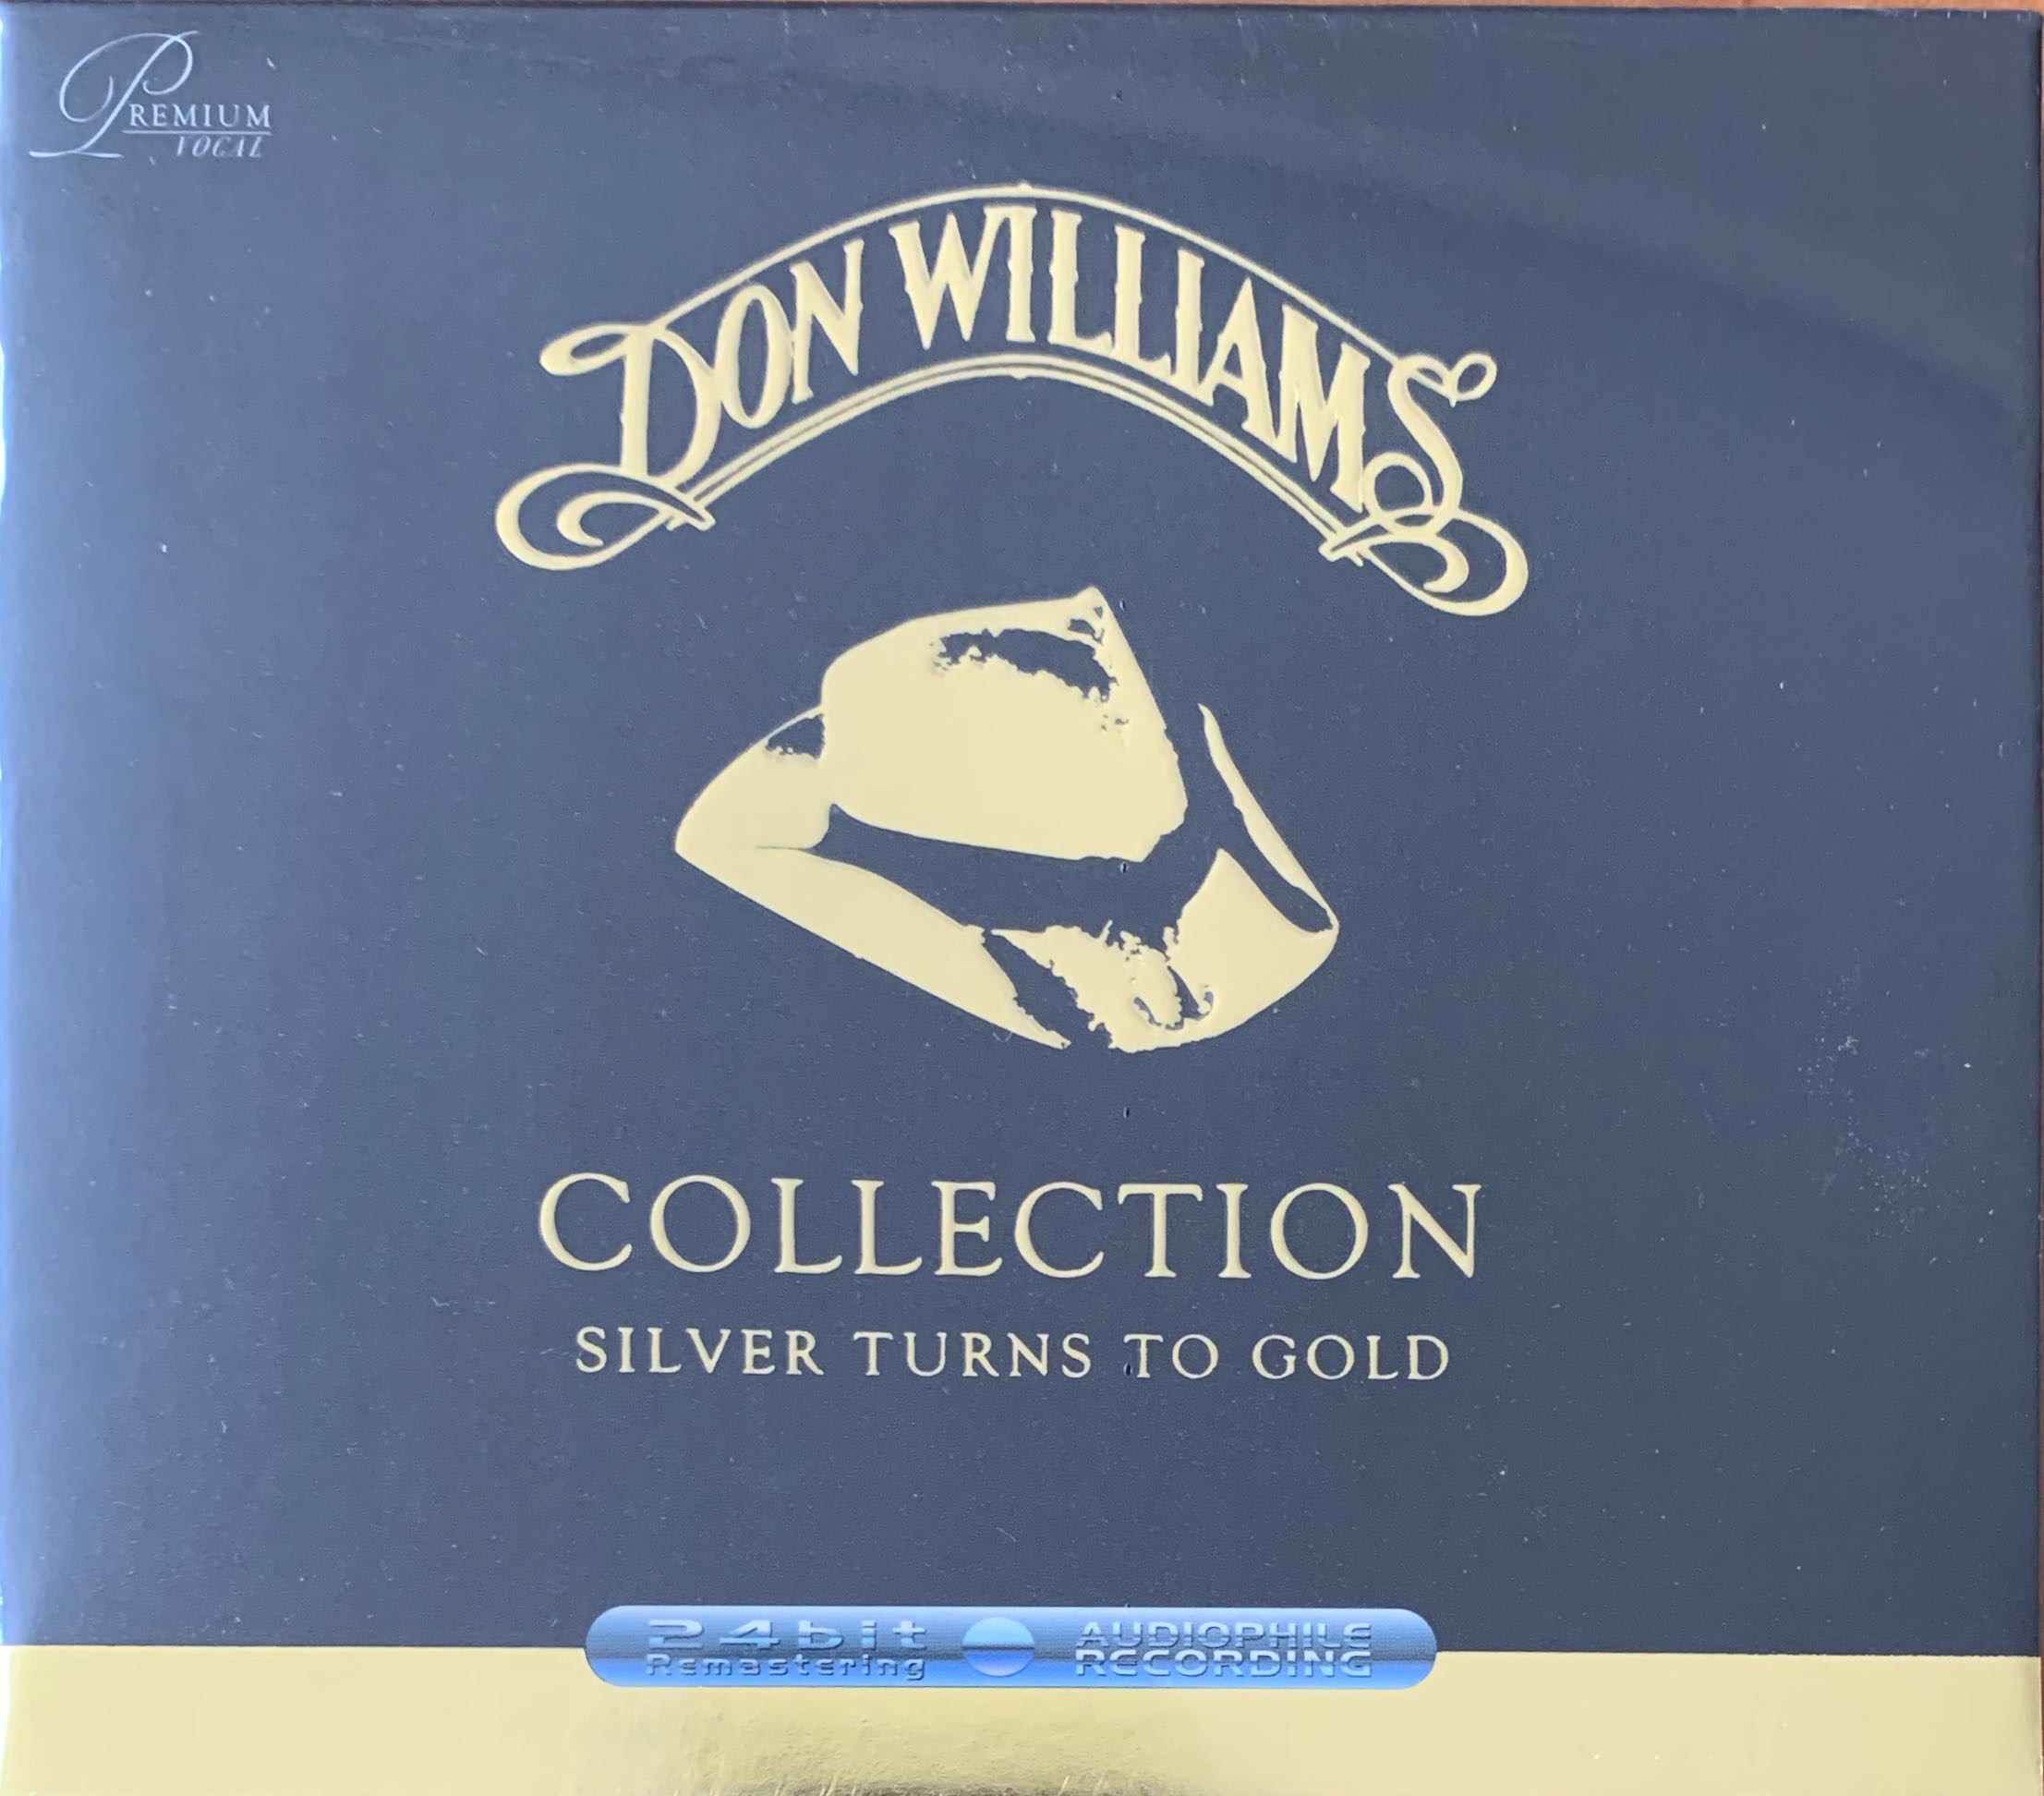 Don Williams - COLLECTION - SILVER TURNS TO GOOD 24bit Audiophile CD